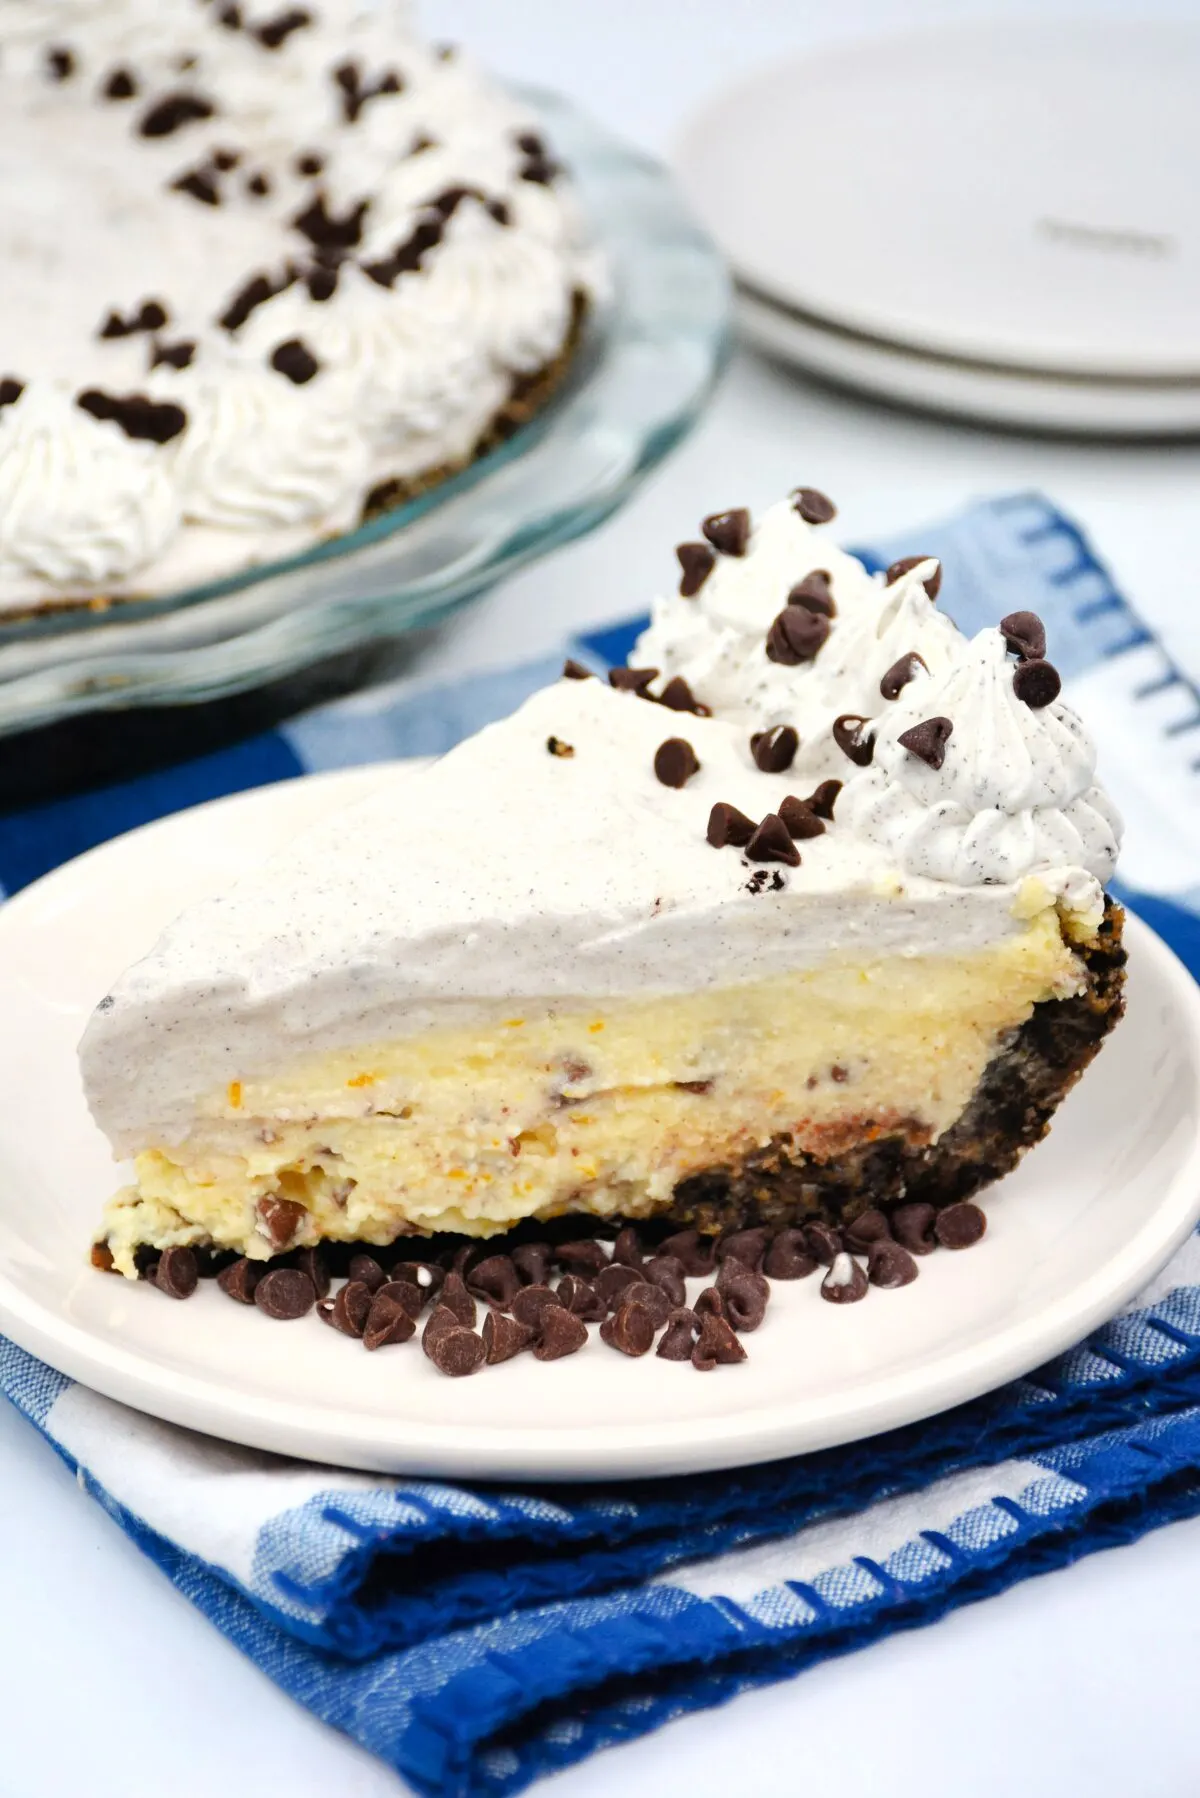 This easy no-bake recipe for cannoli pie will have you enjoying the flavors of delicious Italian cannolis in a whole new way.